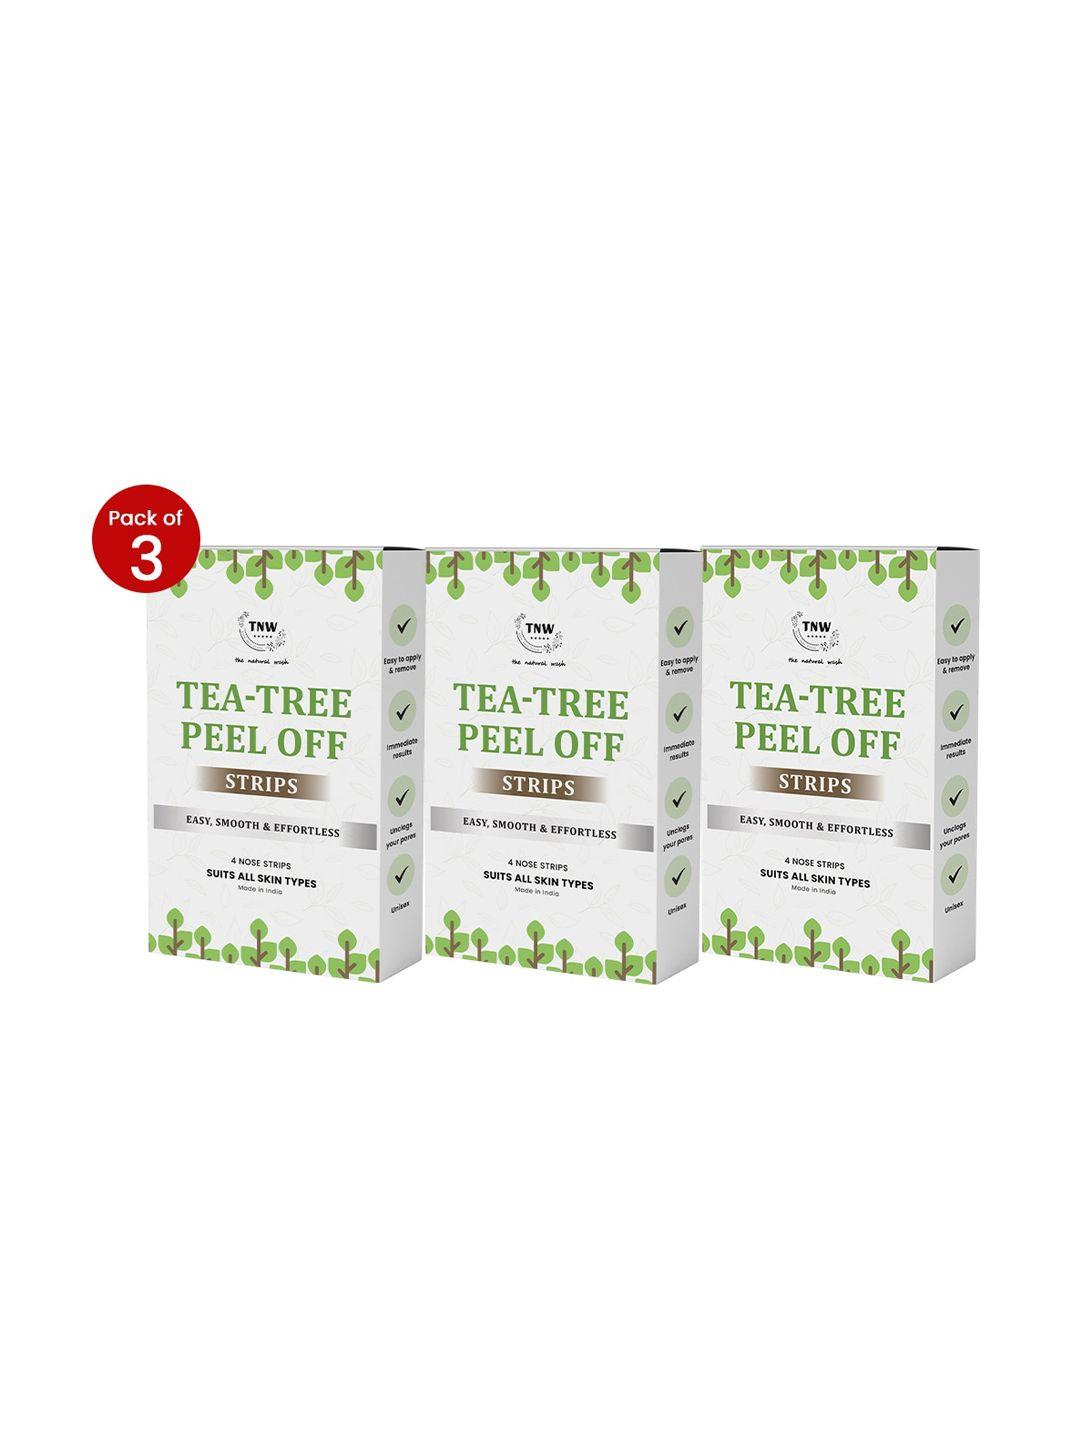 tnw the natural wash set of 3 tea tree peel off nose strips - 4 strips each